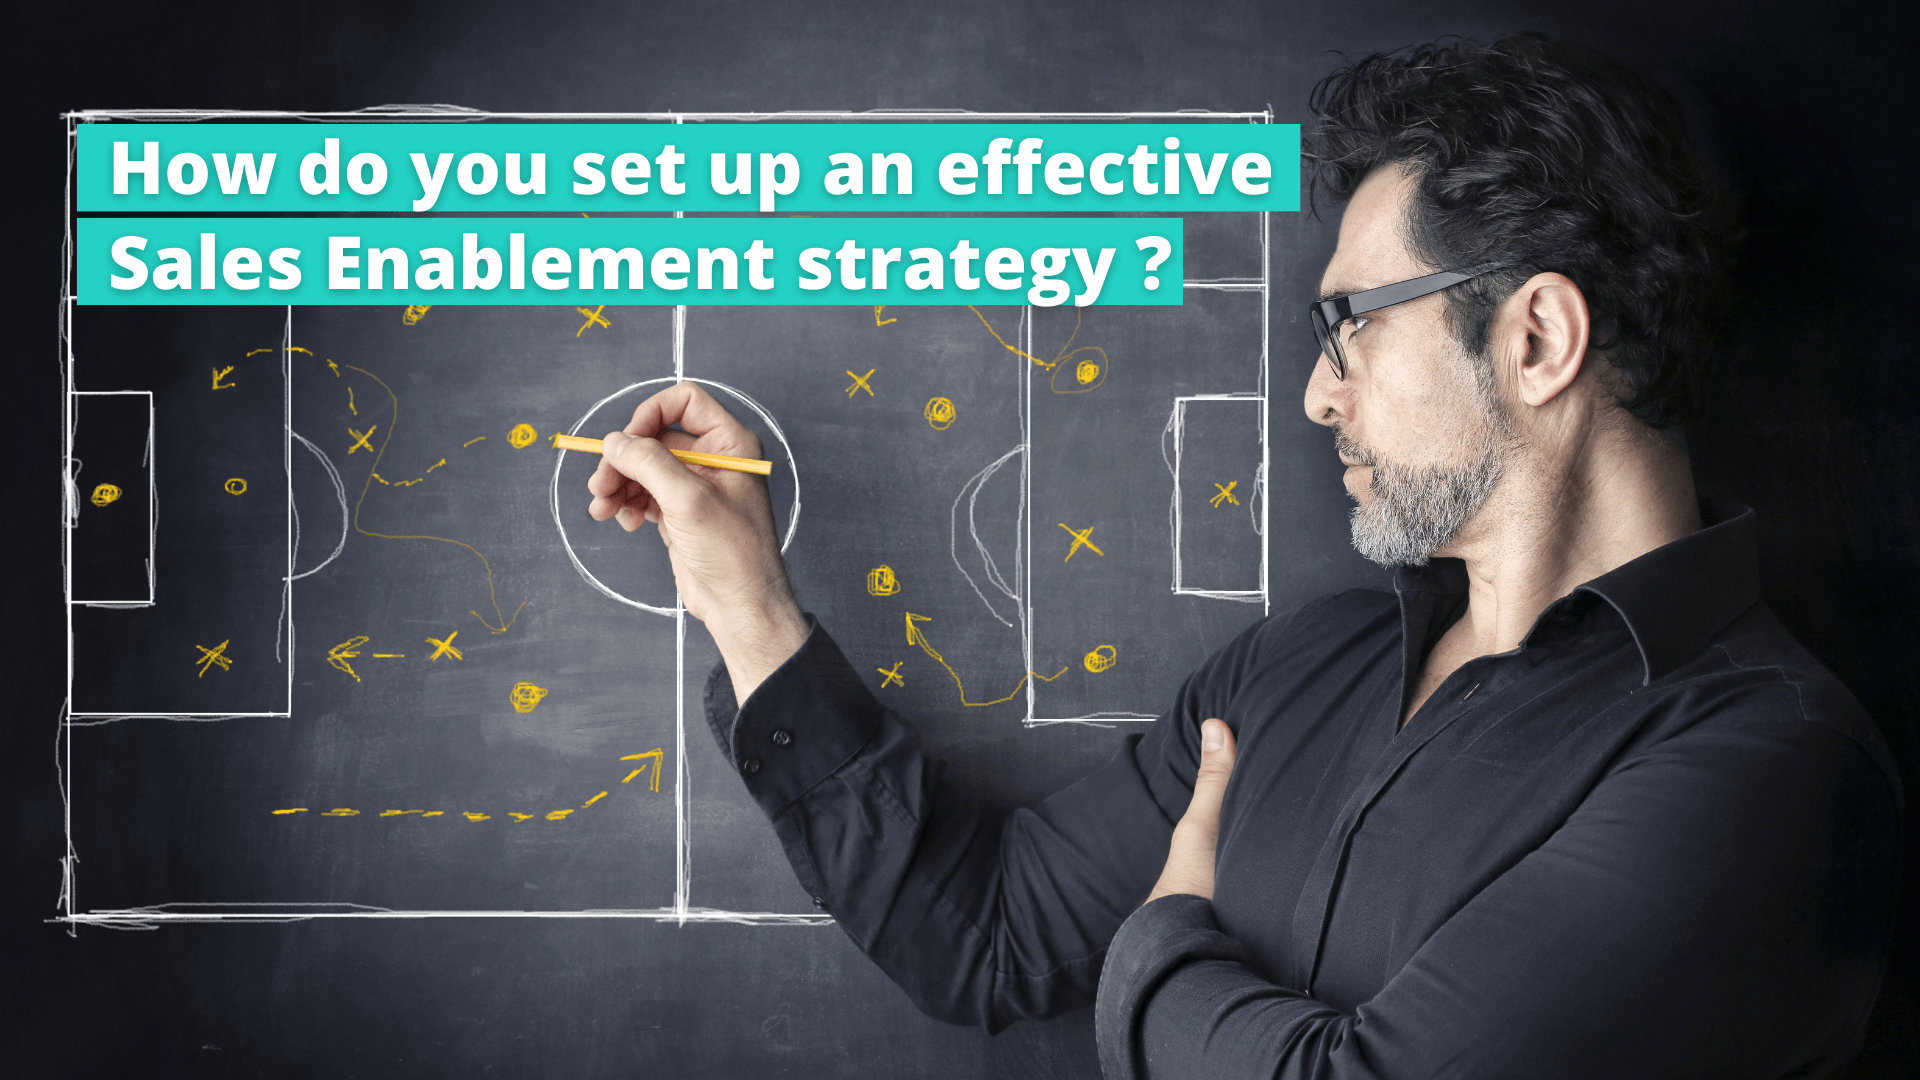 How to implement an effective Sales Enablement strategy?